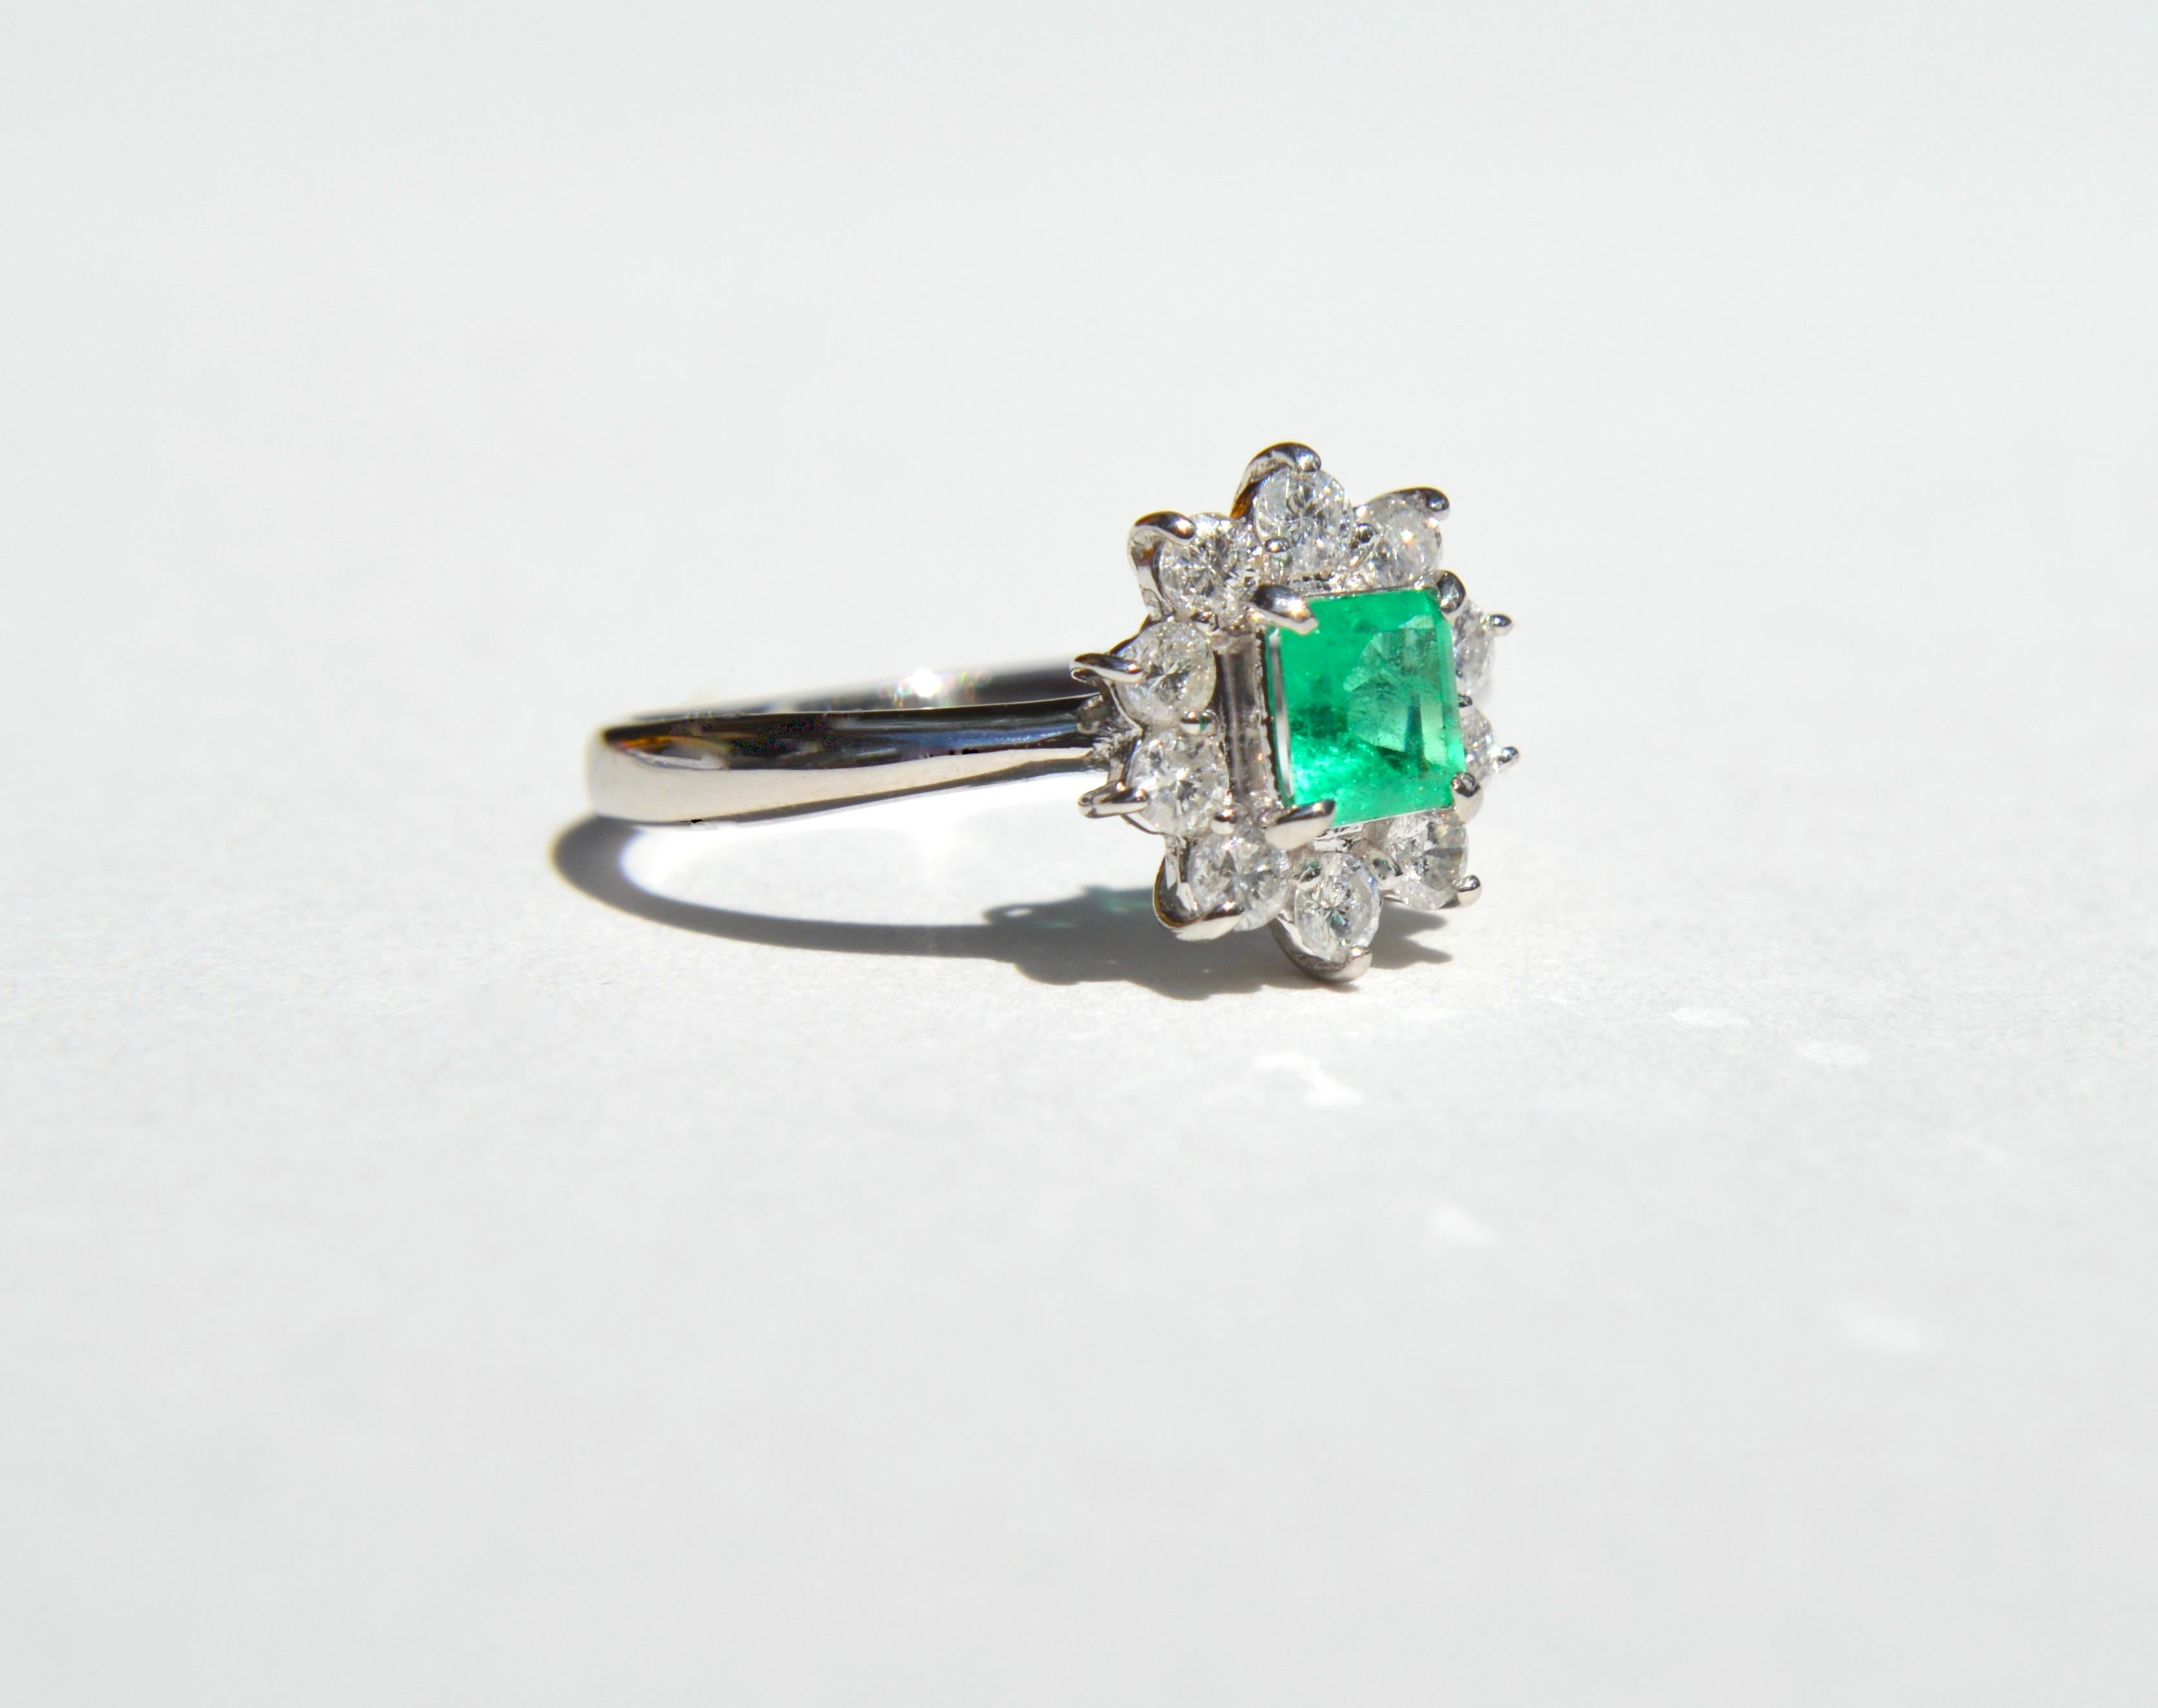 Gorgeous vintage midcentury era 1960s .39 carat natural Colombian Emerald square cut ring with round cut diamond halo set in solid platinum. Size 4.5, can be easily resized by a jeweler. Marked and tested as Pt900 for solid platinum. In very good